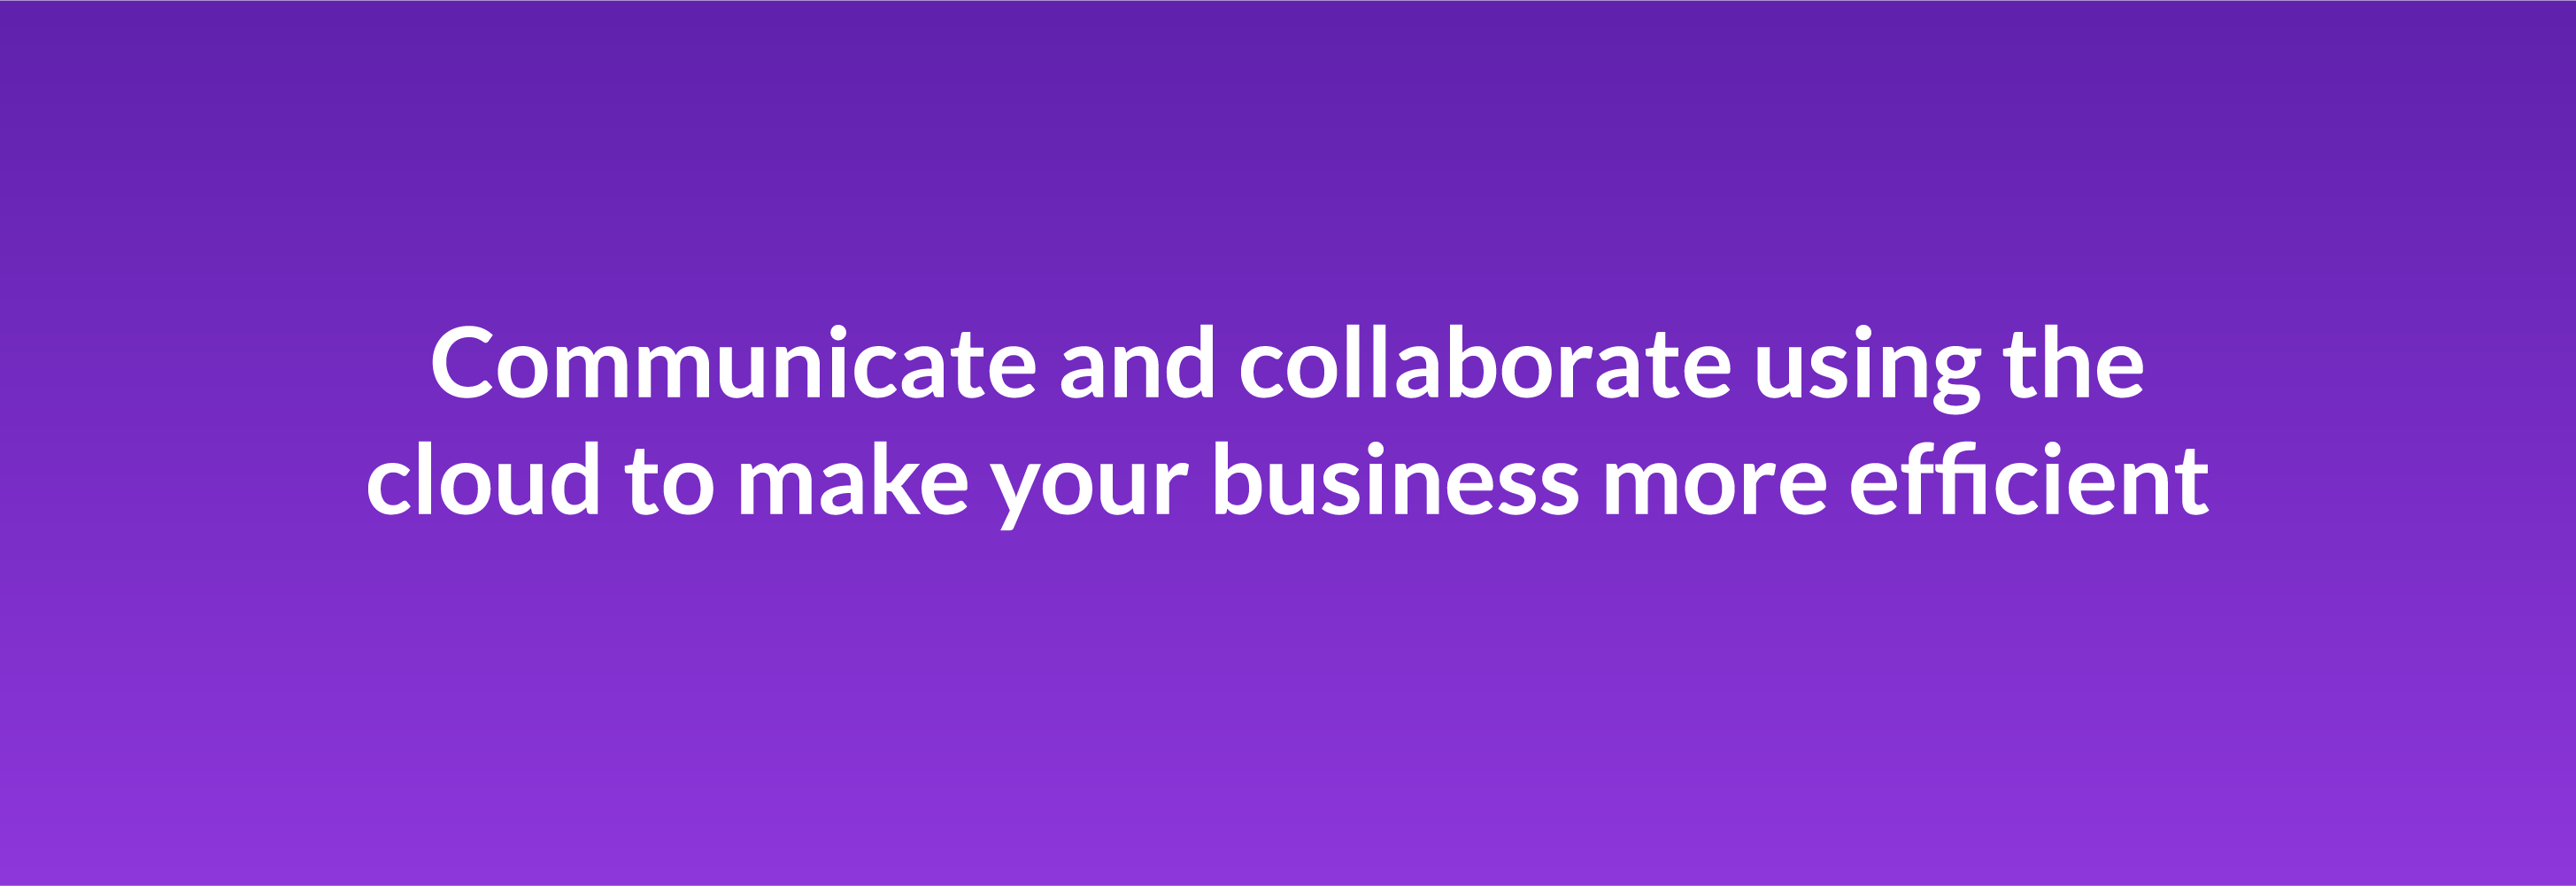 Communicate and collaborate using the cloud to make your business more efficient